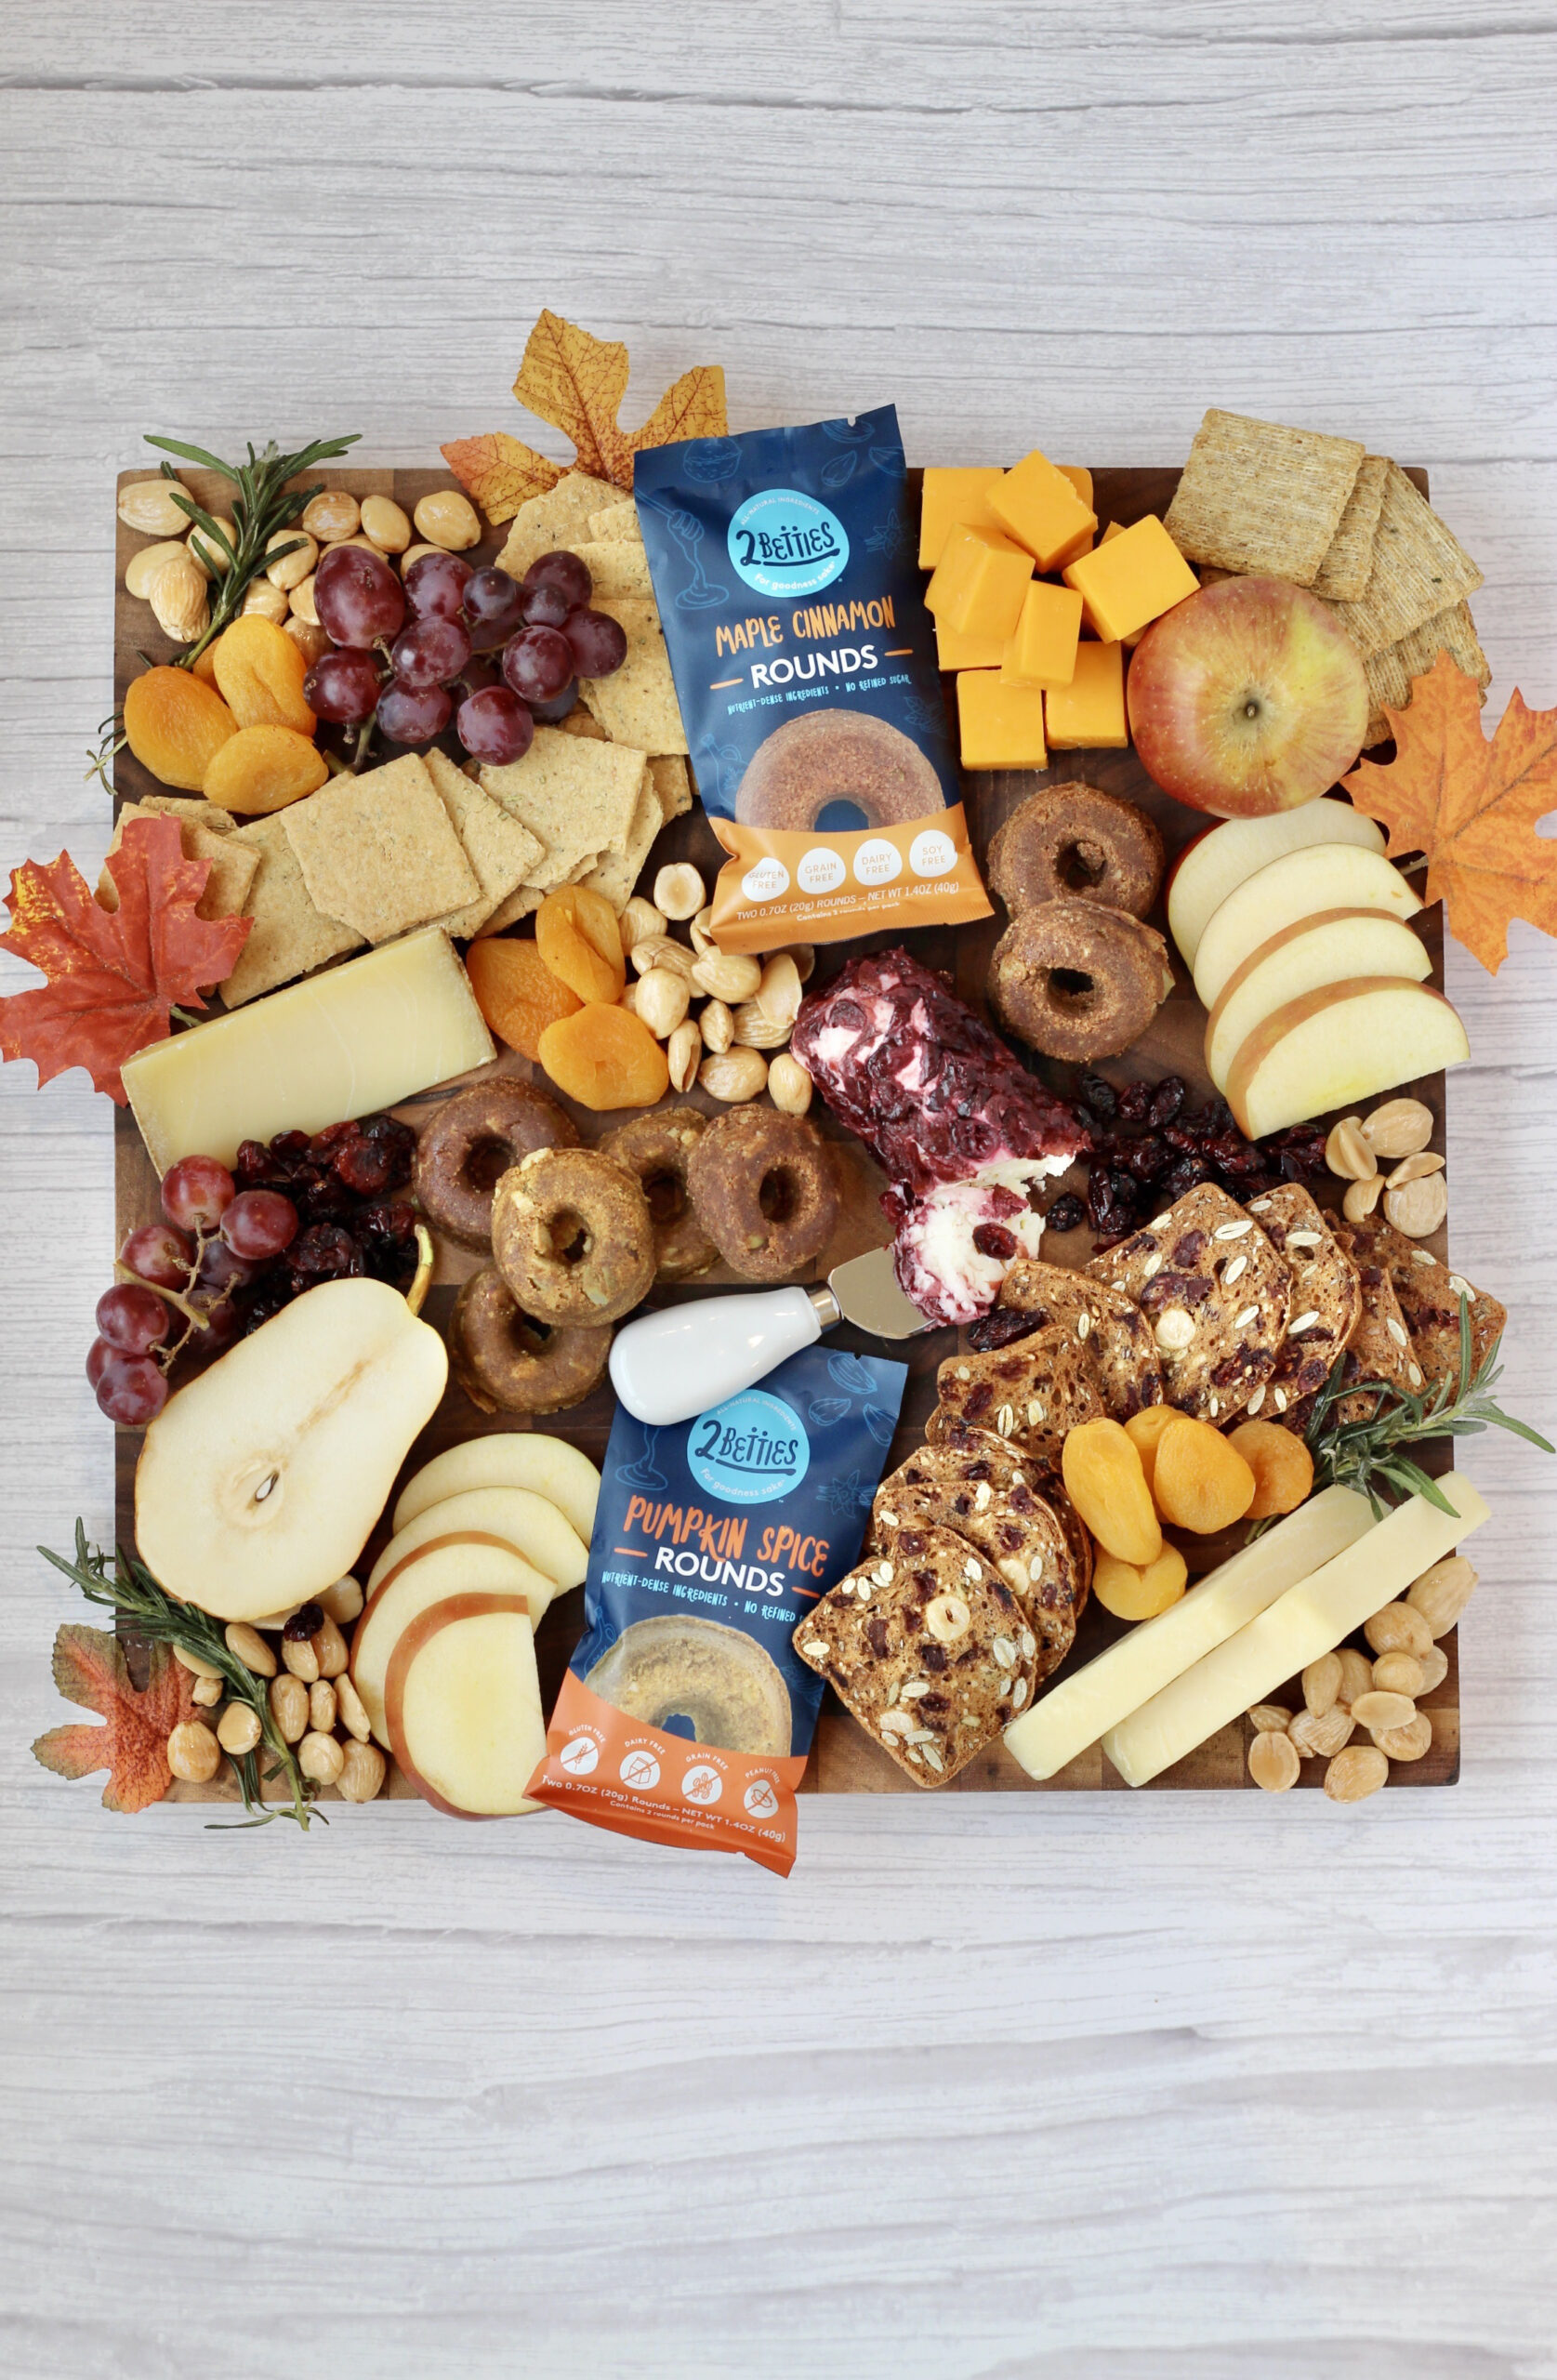 https://cheerfulchoices.com/wp-content/uploads/2022/09/Fall-Charcuterie-Board-scaled.jpeg